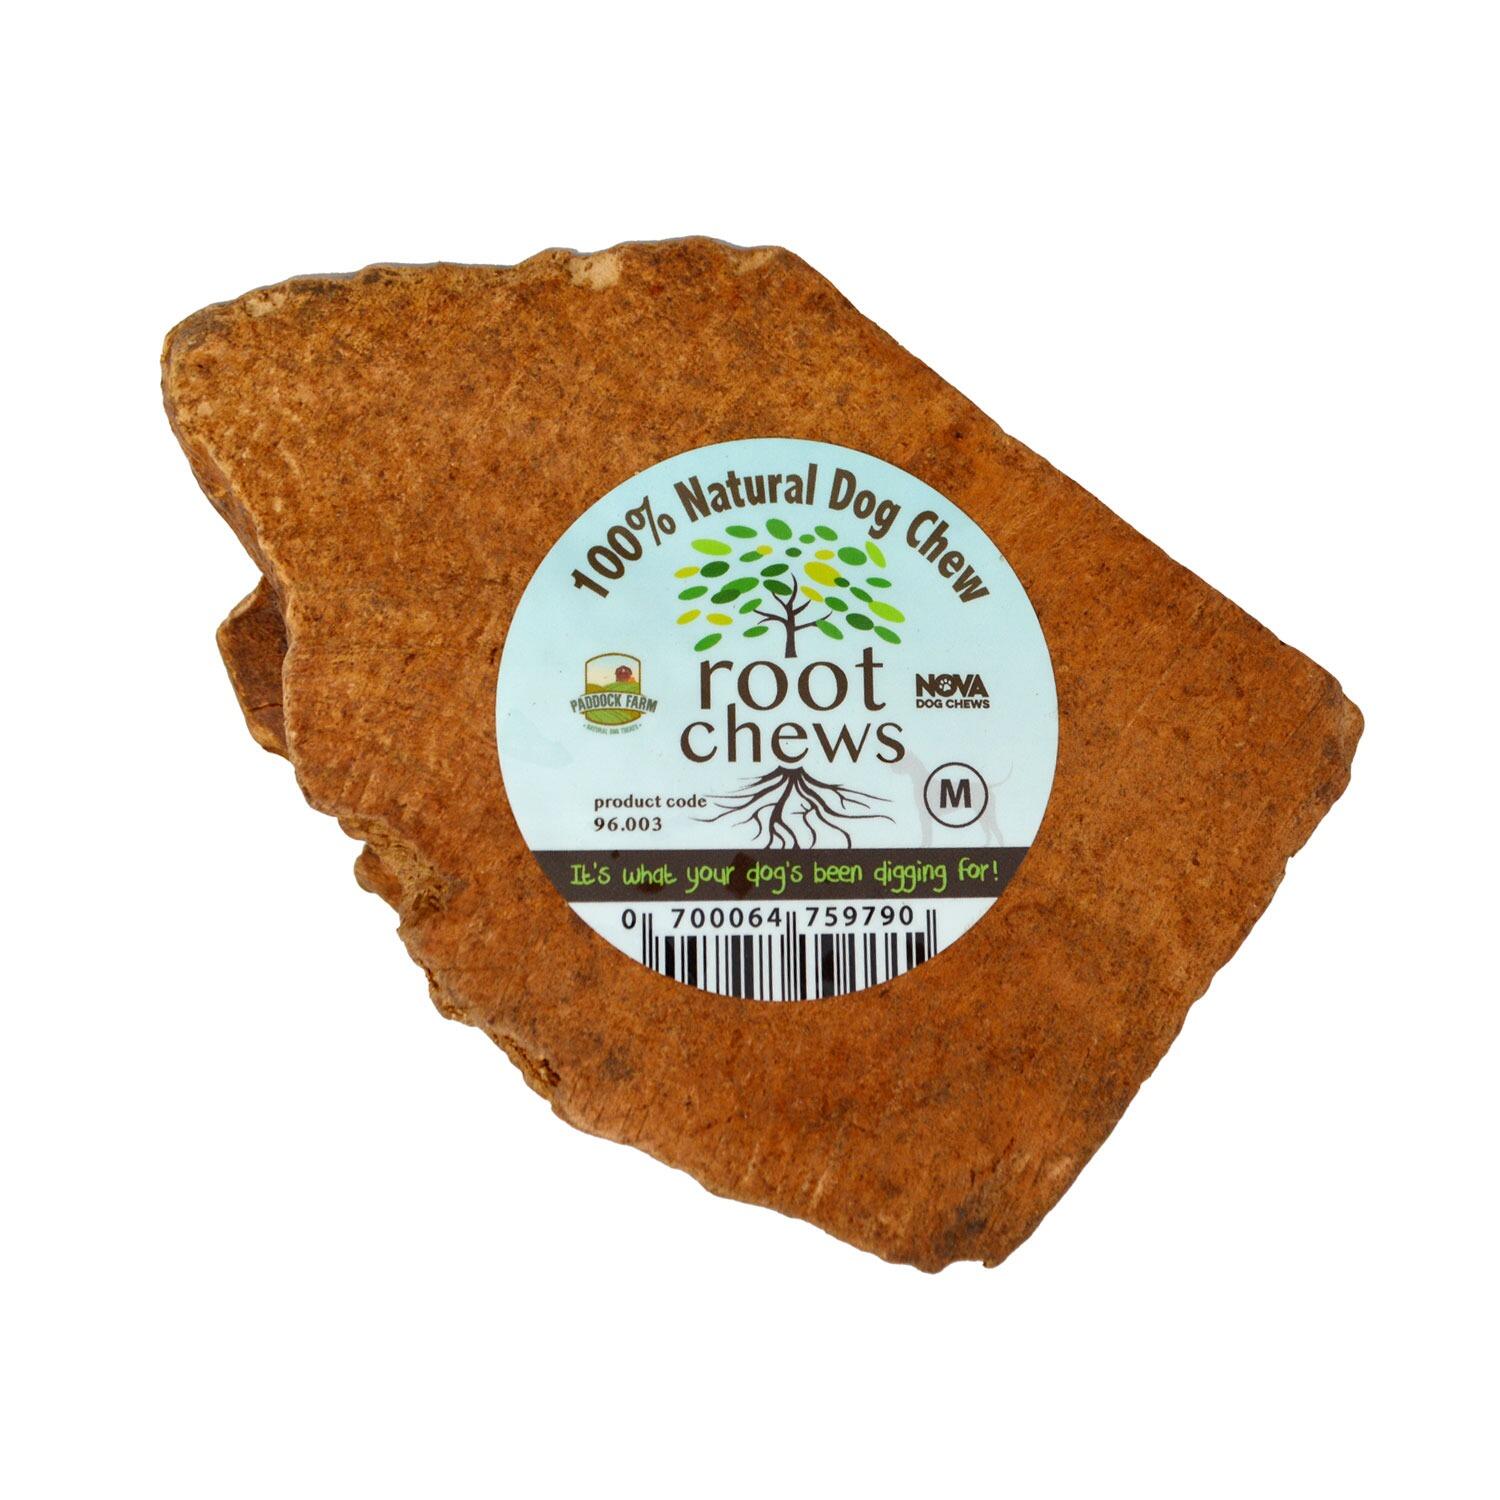 Natural Wood Root Chew for Dogs from Paddock Farm